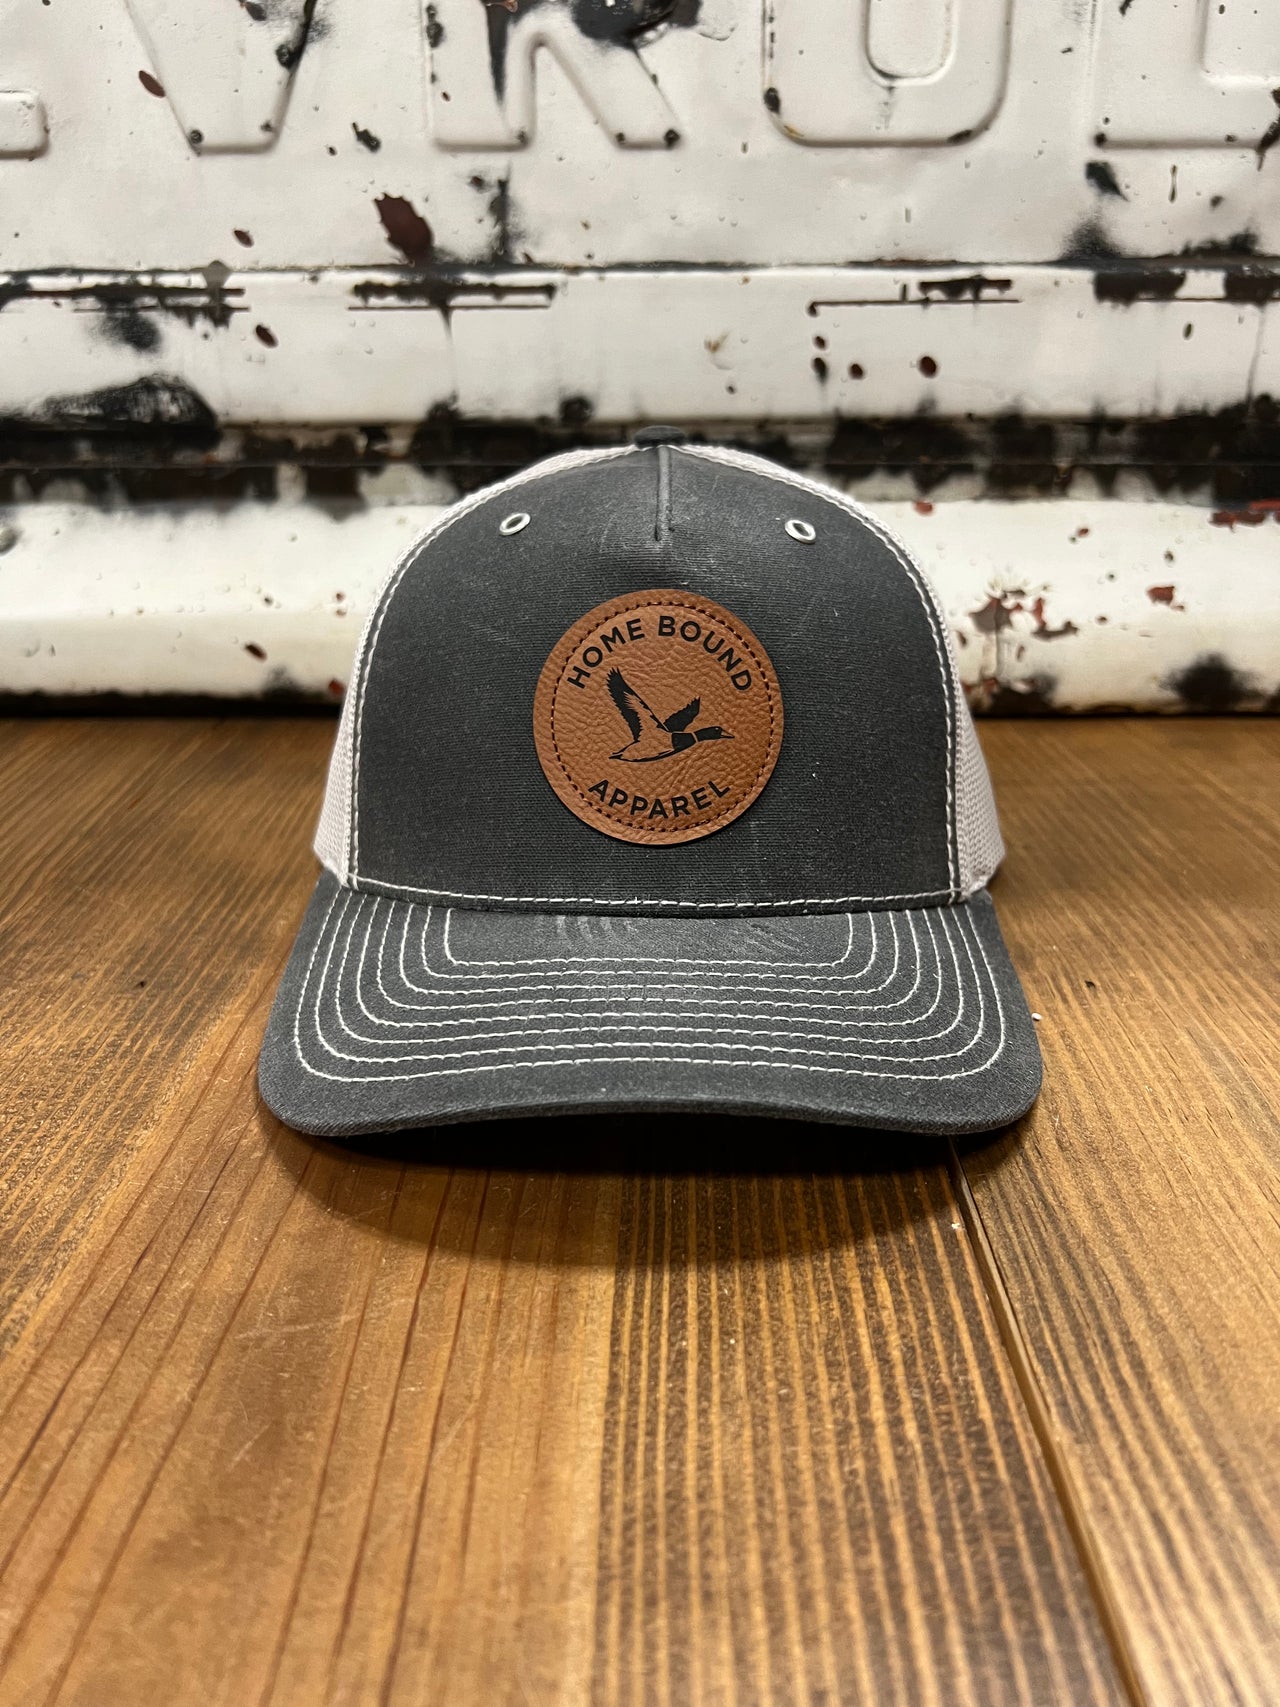 Home Bound Flying Duck Leather Patch Cap - Waxed Blue Jean/Grey